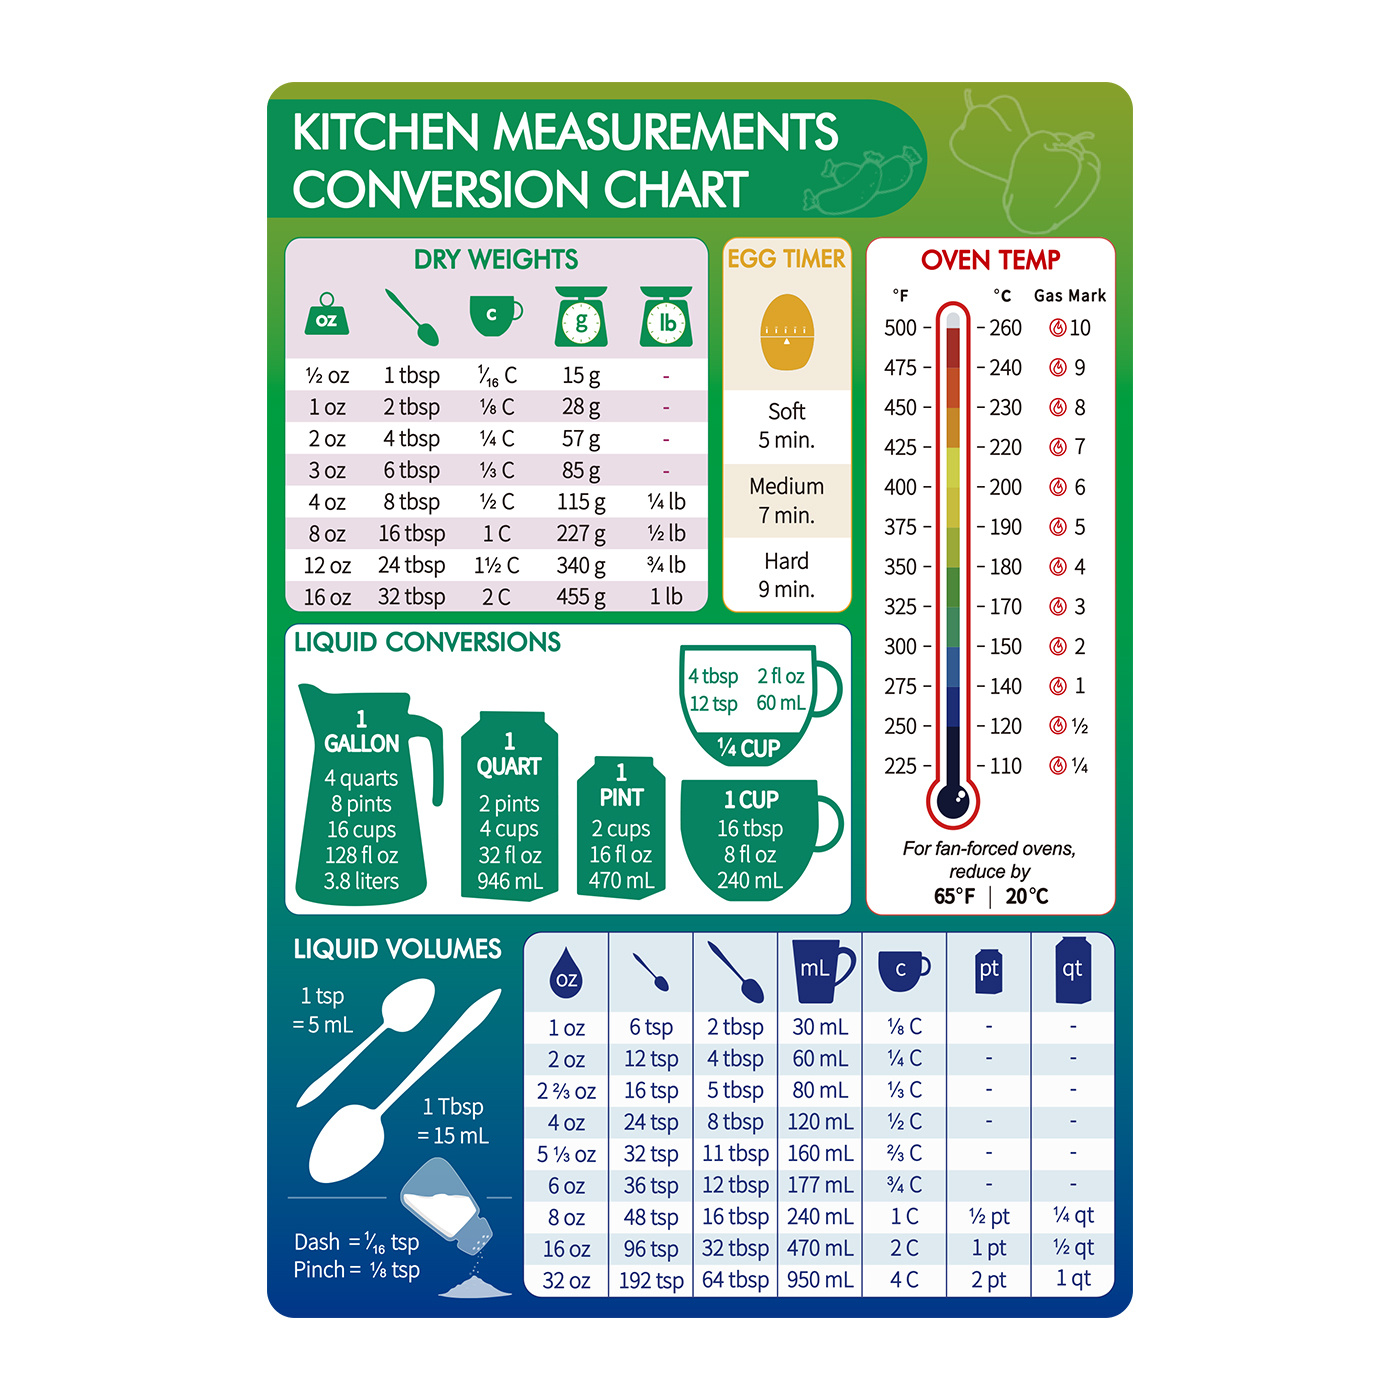 Kitchen Conversion Chart Magnet - Imperial & Metric to Standard Conversion Chart Decor Cooking Measurements for Food - Measuring Weight, Liquid, Tempe